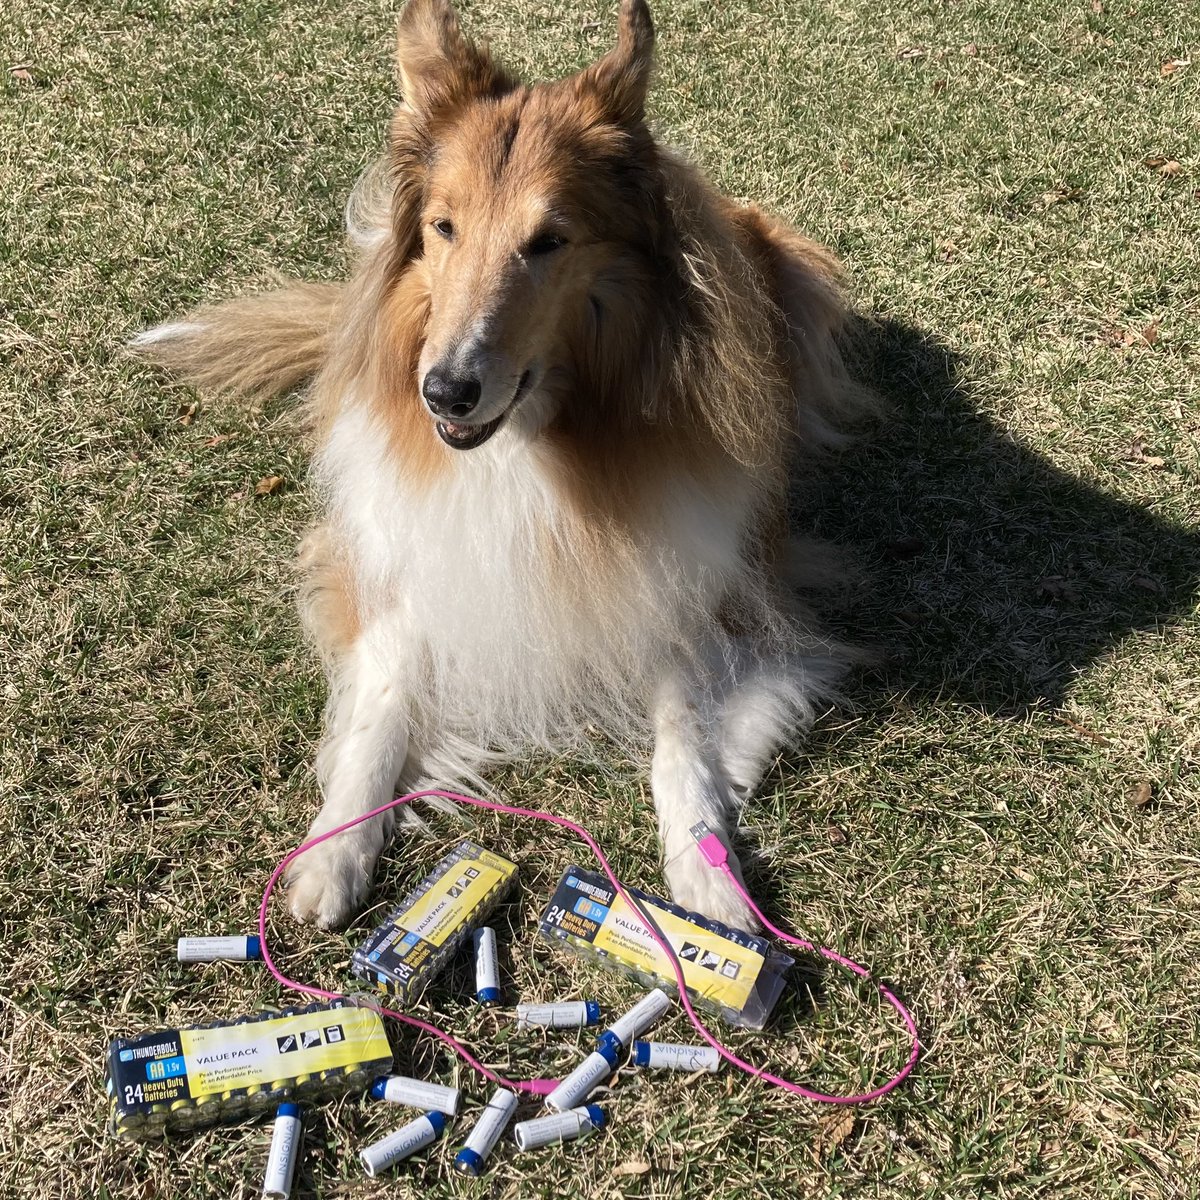 🔋 Recharging my 🪫 batteries with some ☀️ #SolarPower on #NationalBatteryDay 
🪫☀️🔋🔌

#chargingmybatteries #rechargingmybatteries #solarpowered #batteries #batteryoperated #collie #roughcollie 
#dogpowered